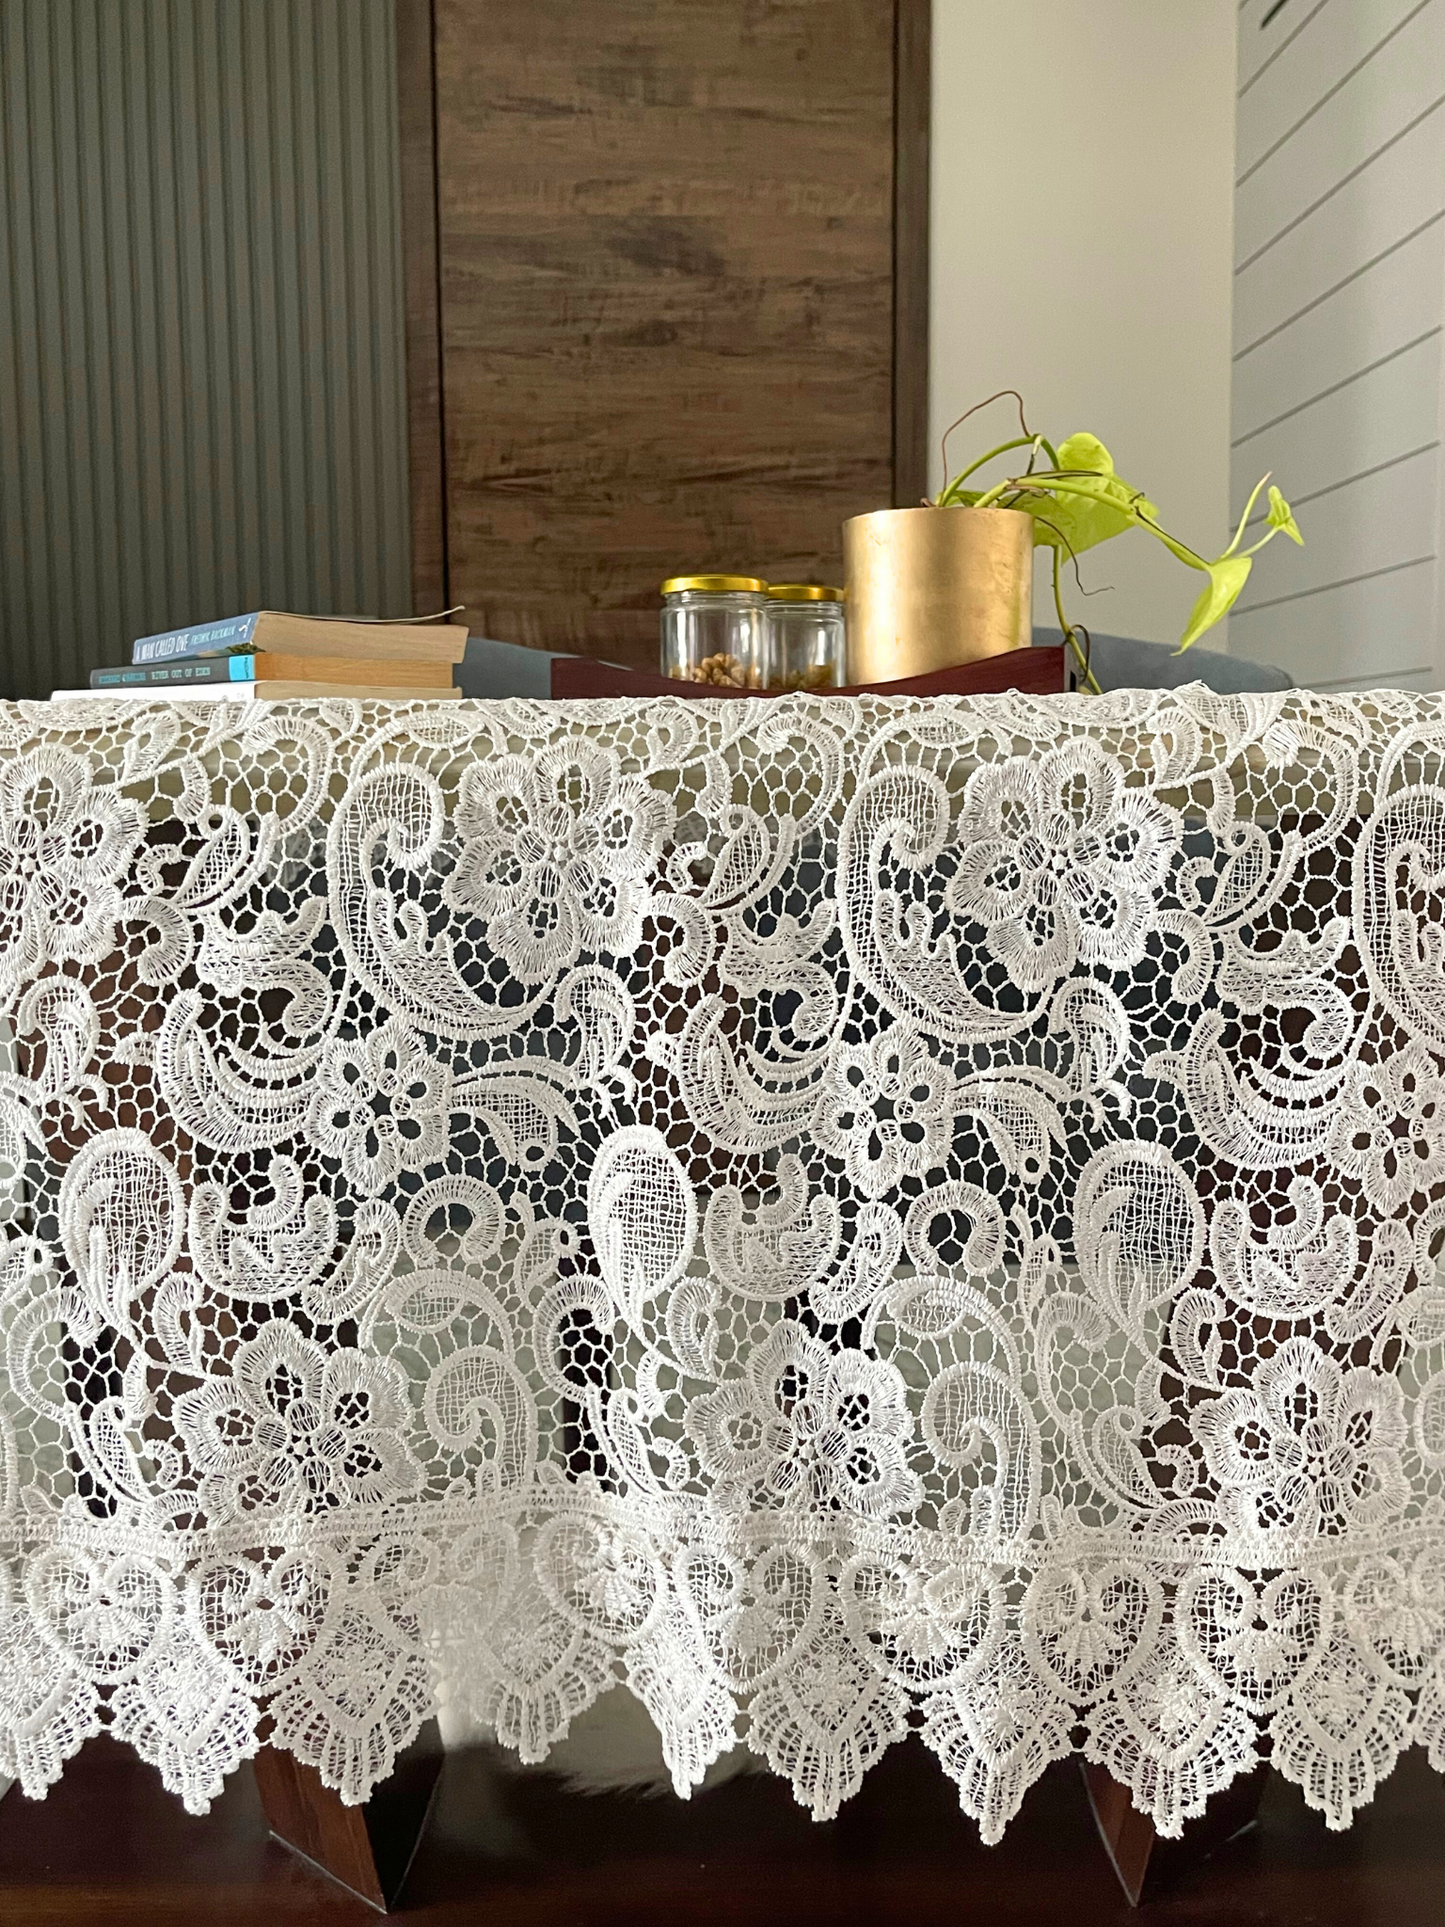 white net and lace luxurious table linen for dinner parties